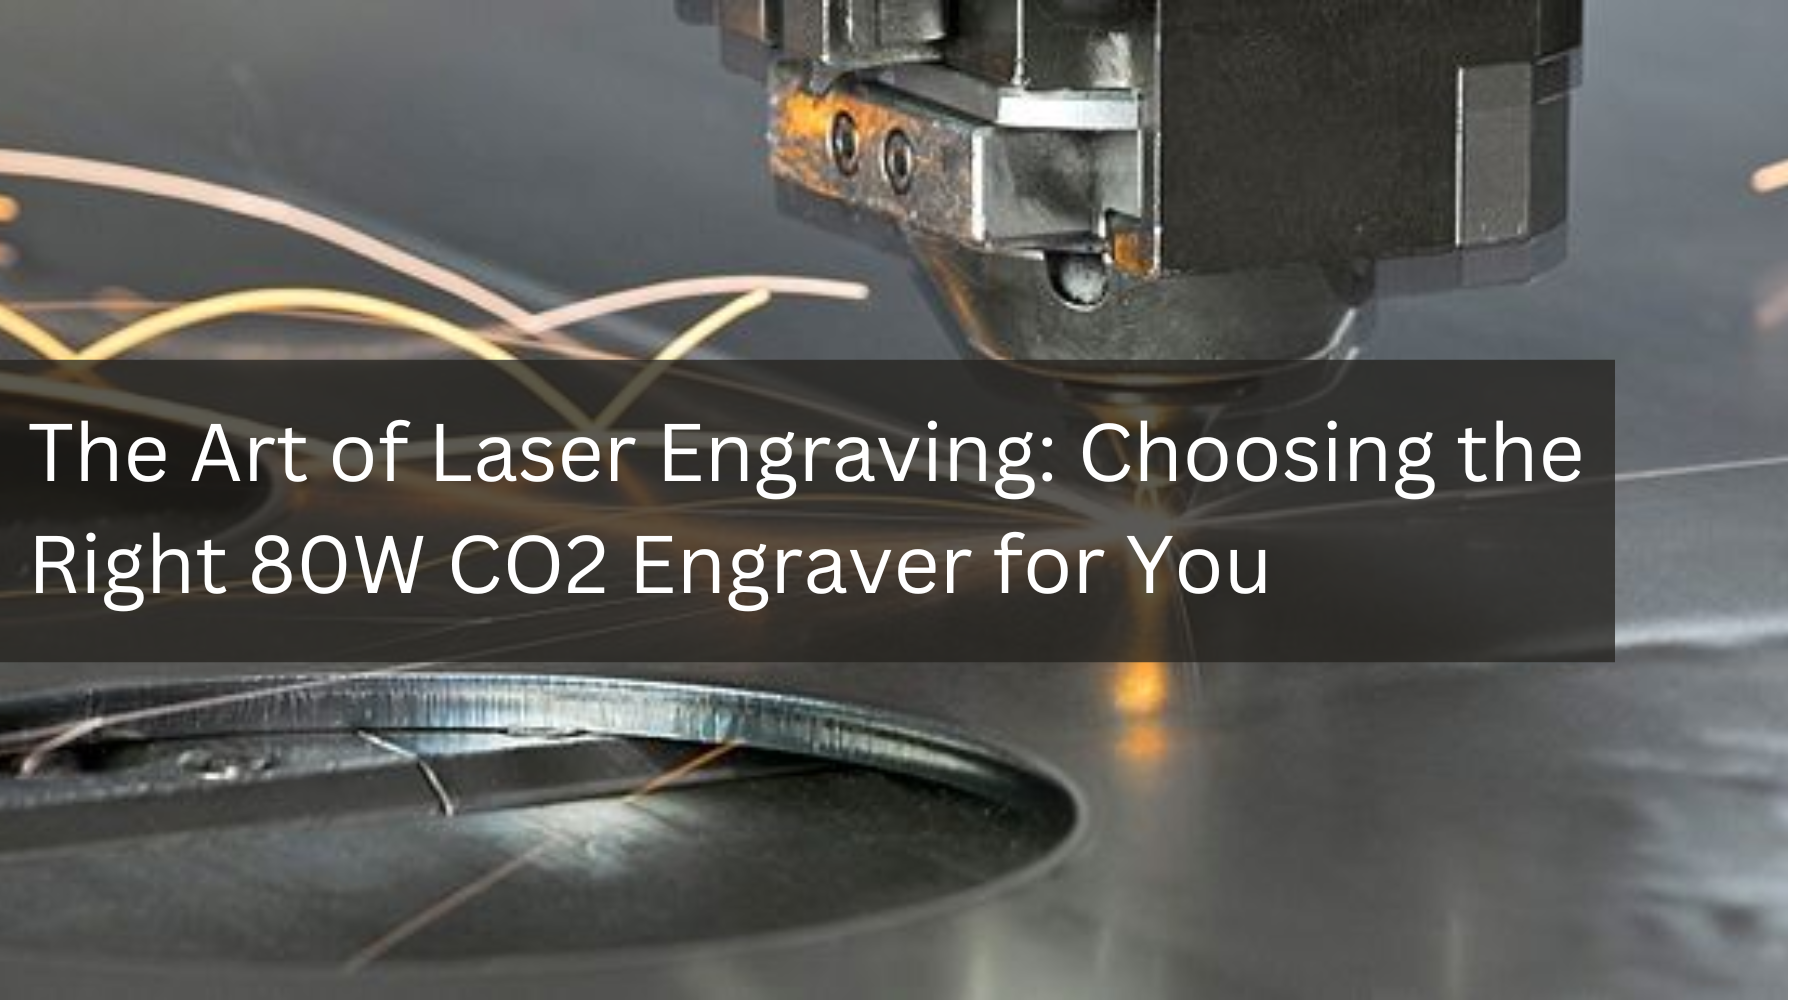 The Art of Laser Engraving: Choosing the Right 80W CO2 Engraver for You